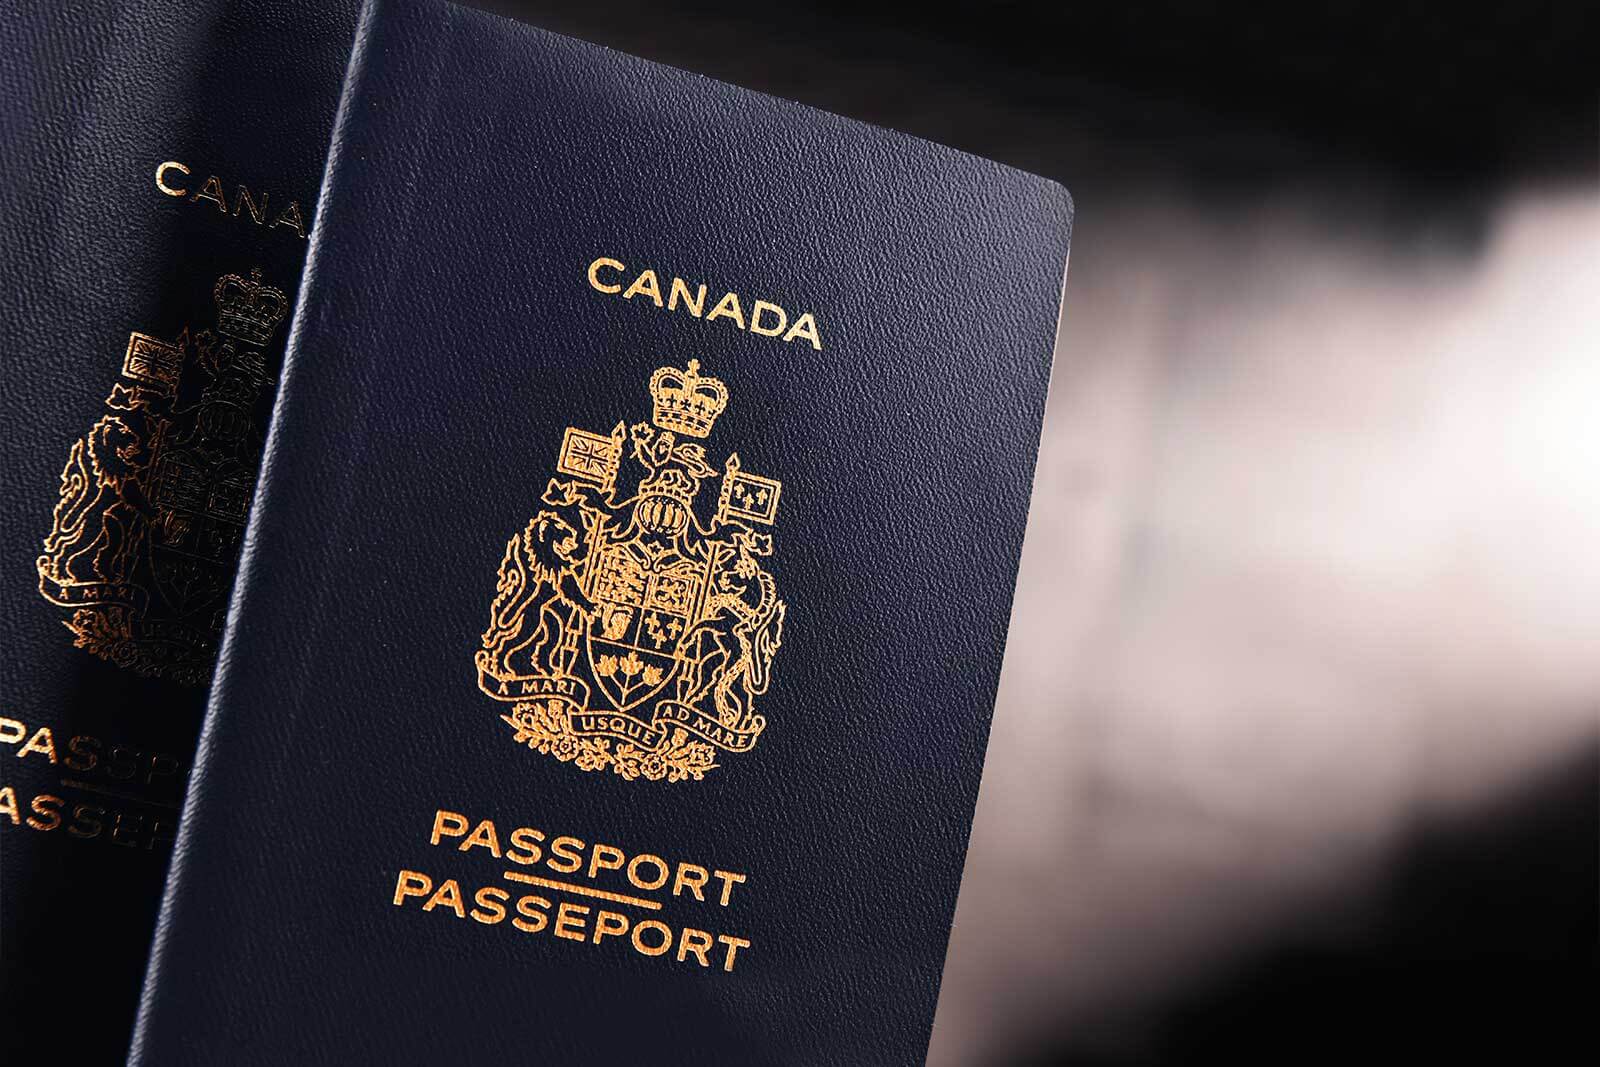 Step By Step Guide On To Get Canada Permanent Residency